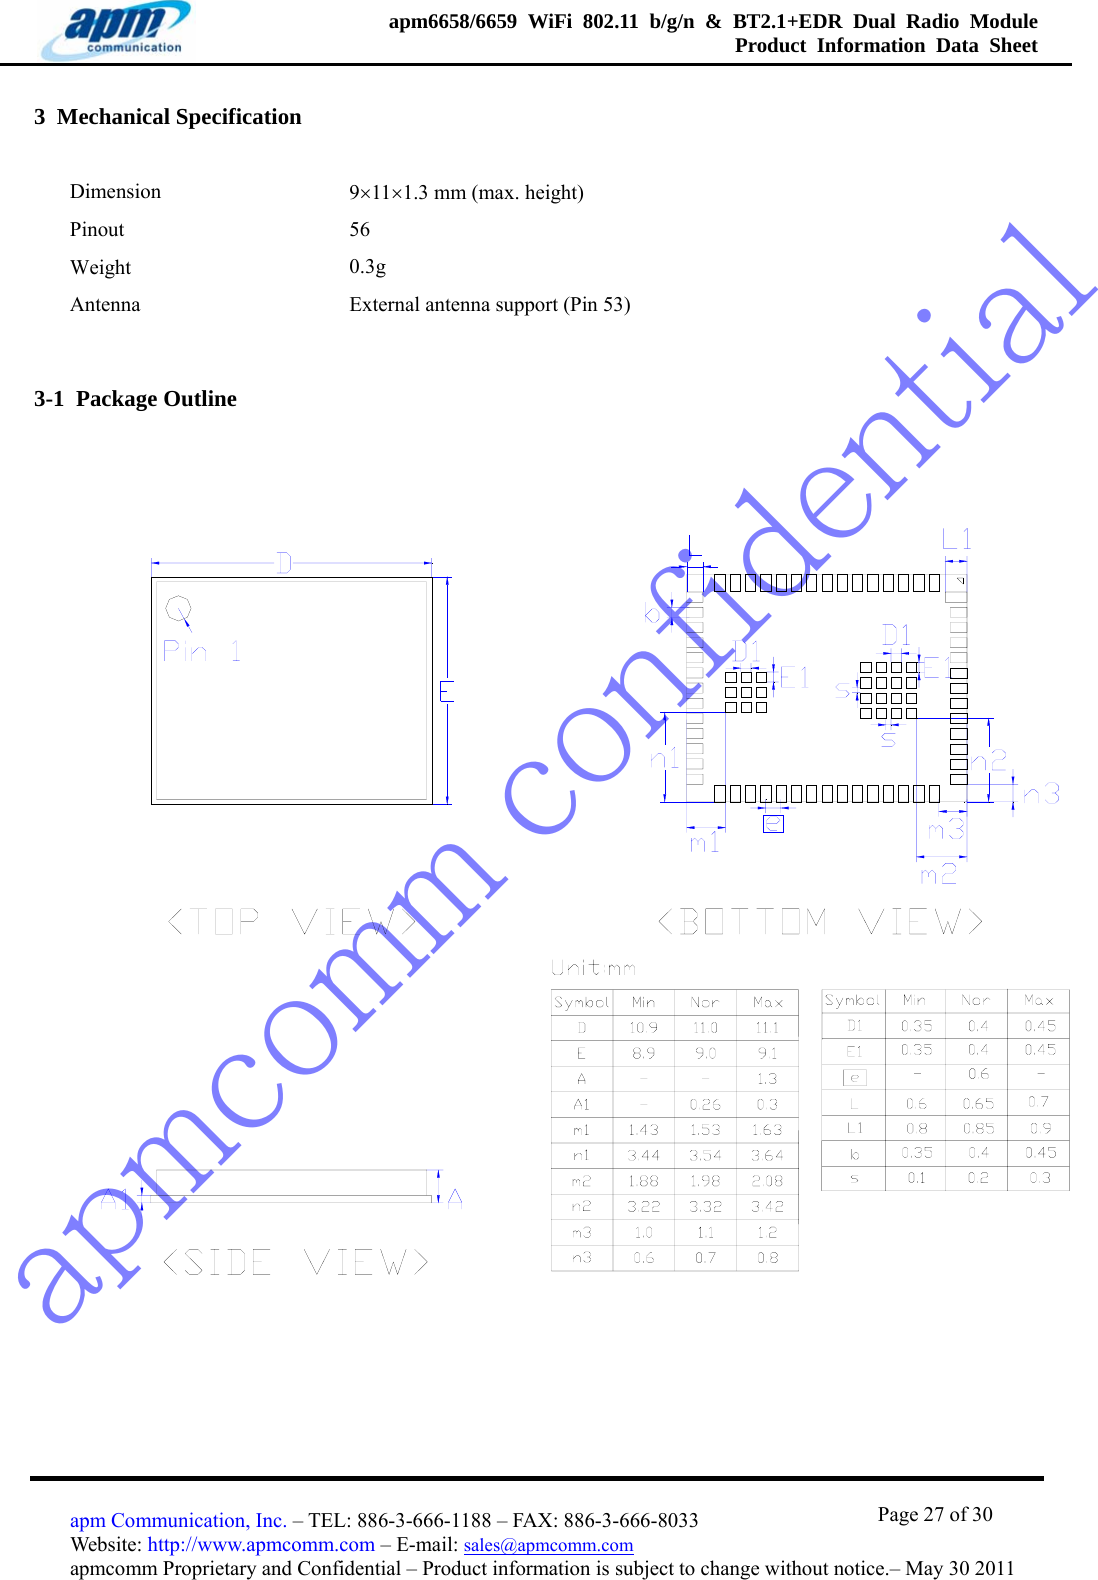 apmcomm confidentialapm6658/6659 WiFi 802.11 b/g/n &amp; BT2.1+EDR Dual Radio Module  Product Information Data Sheet                                       Page 27 of 30 apm Communication, Inc. – TEL: 886-3-666-1188 – FAX: 886-3-666-8033 Website: http://www.apmcomm.com – E-mail: sales@apmcomm.com  apmcomm Proprietary and Confidential – Product information is subject to change without notice.– May 30 2011 3  Mechanical Specification Dimension  9×11×1.3 mm (max. height) Pinout  56 Weight  0.3g Antenna  External antenna support (Pin 53) 3-1  Package Outline  